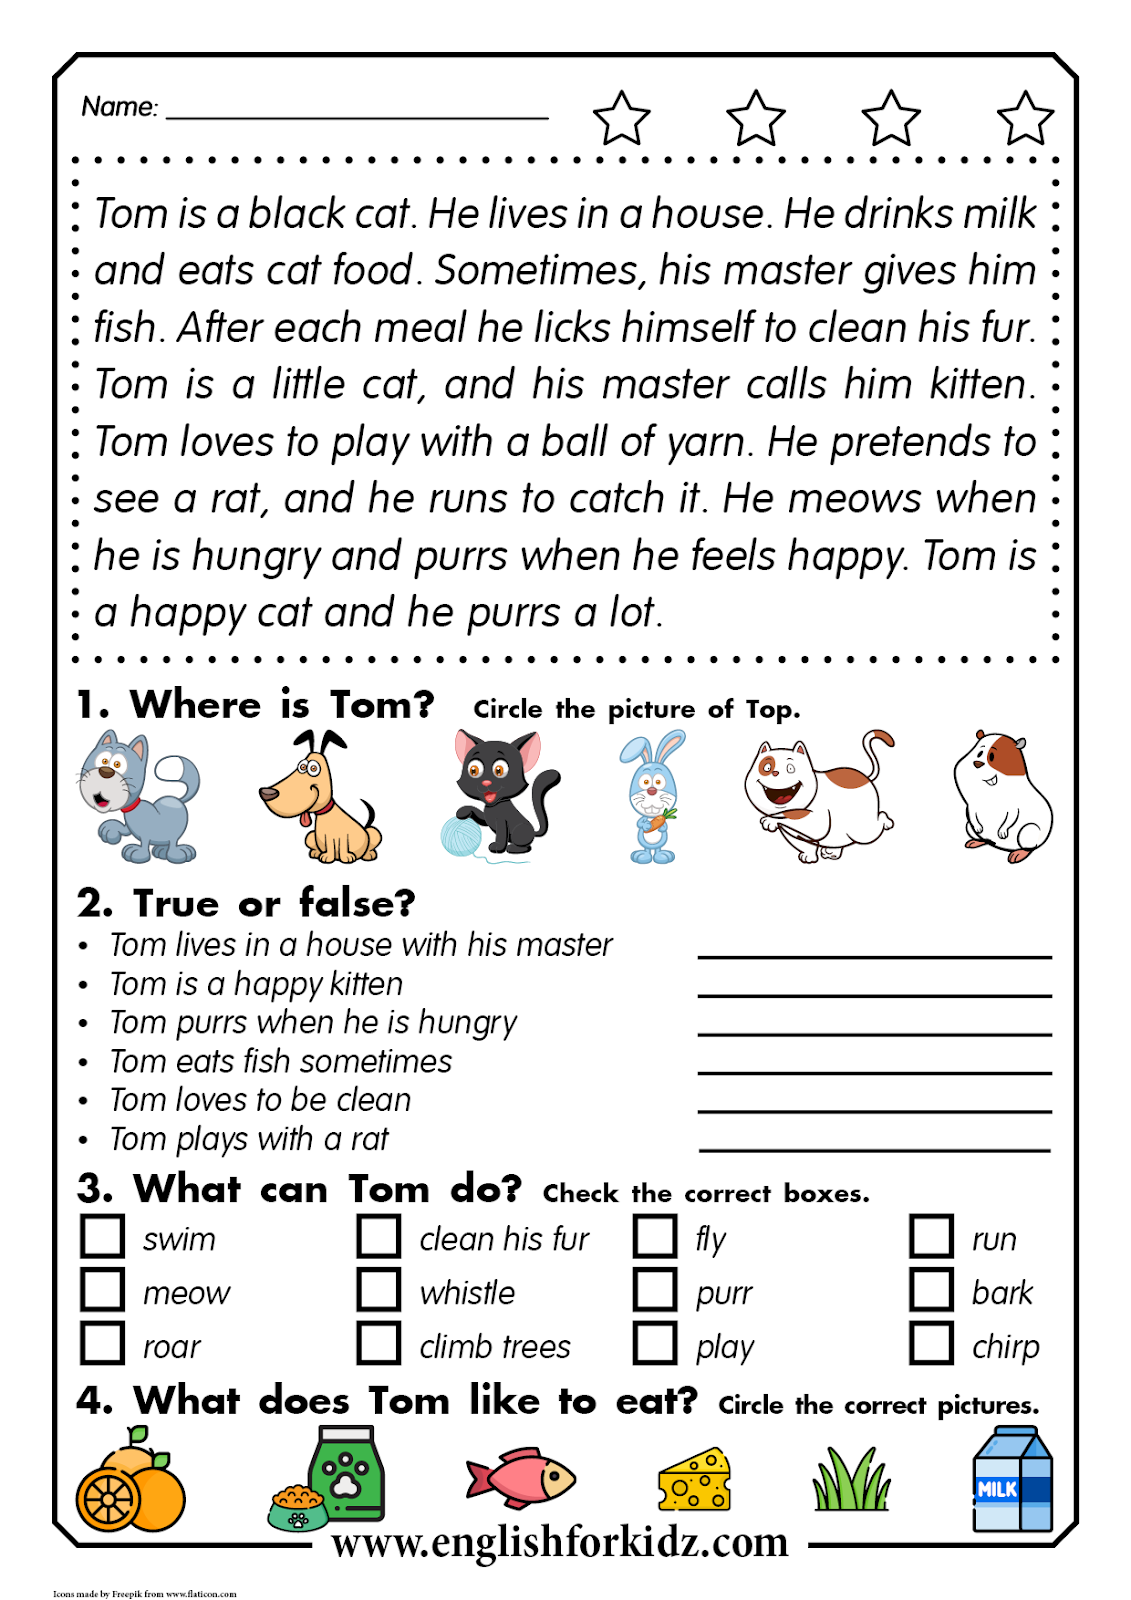 Reading Comprehension Worksheets: Thomas the Cat